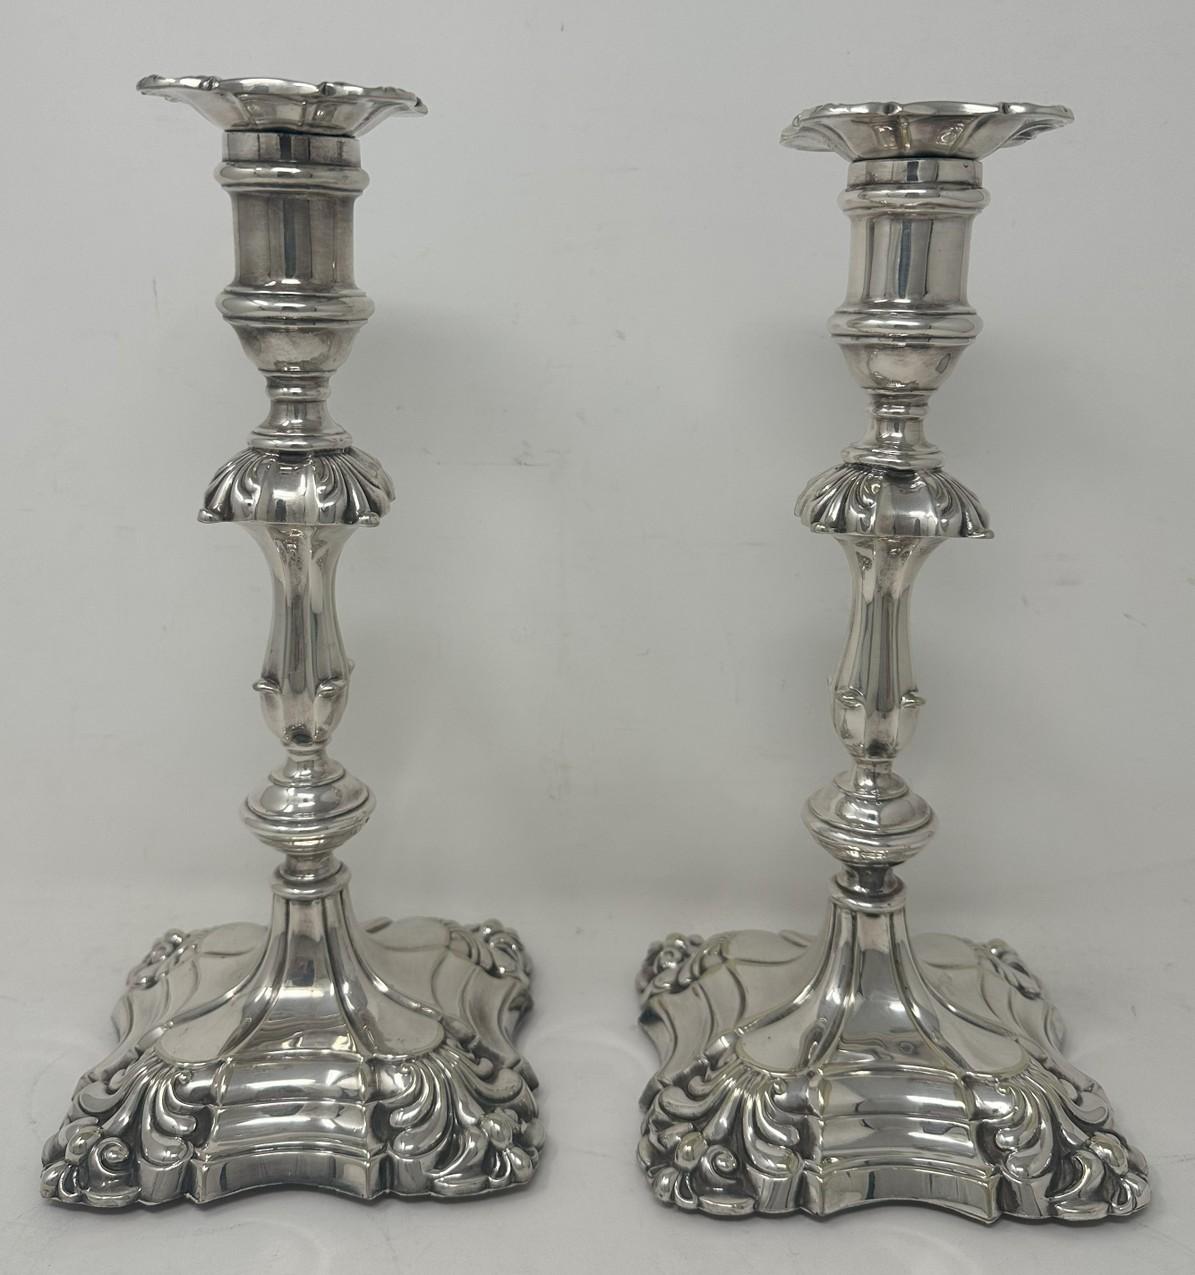 Beautiful and stylish high-quality pair of antique silverplated heavy gauge candlesticks made in the George III style with square ribbed tapering columns, annulated knops and raised stepped square petaled and weighted bases, firmly attributed to